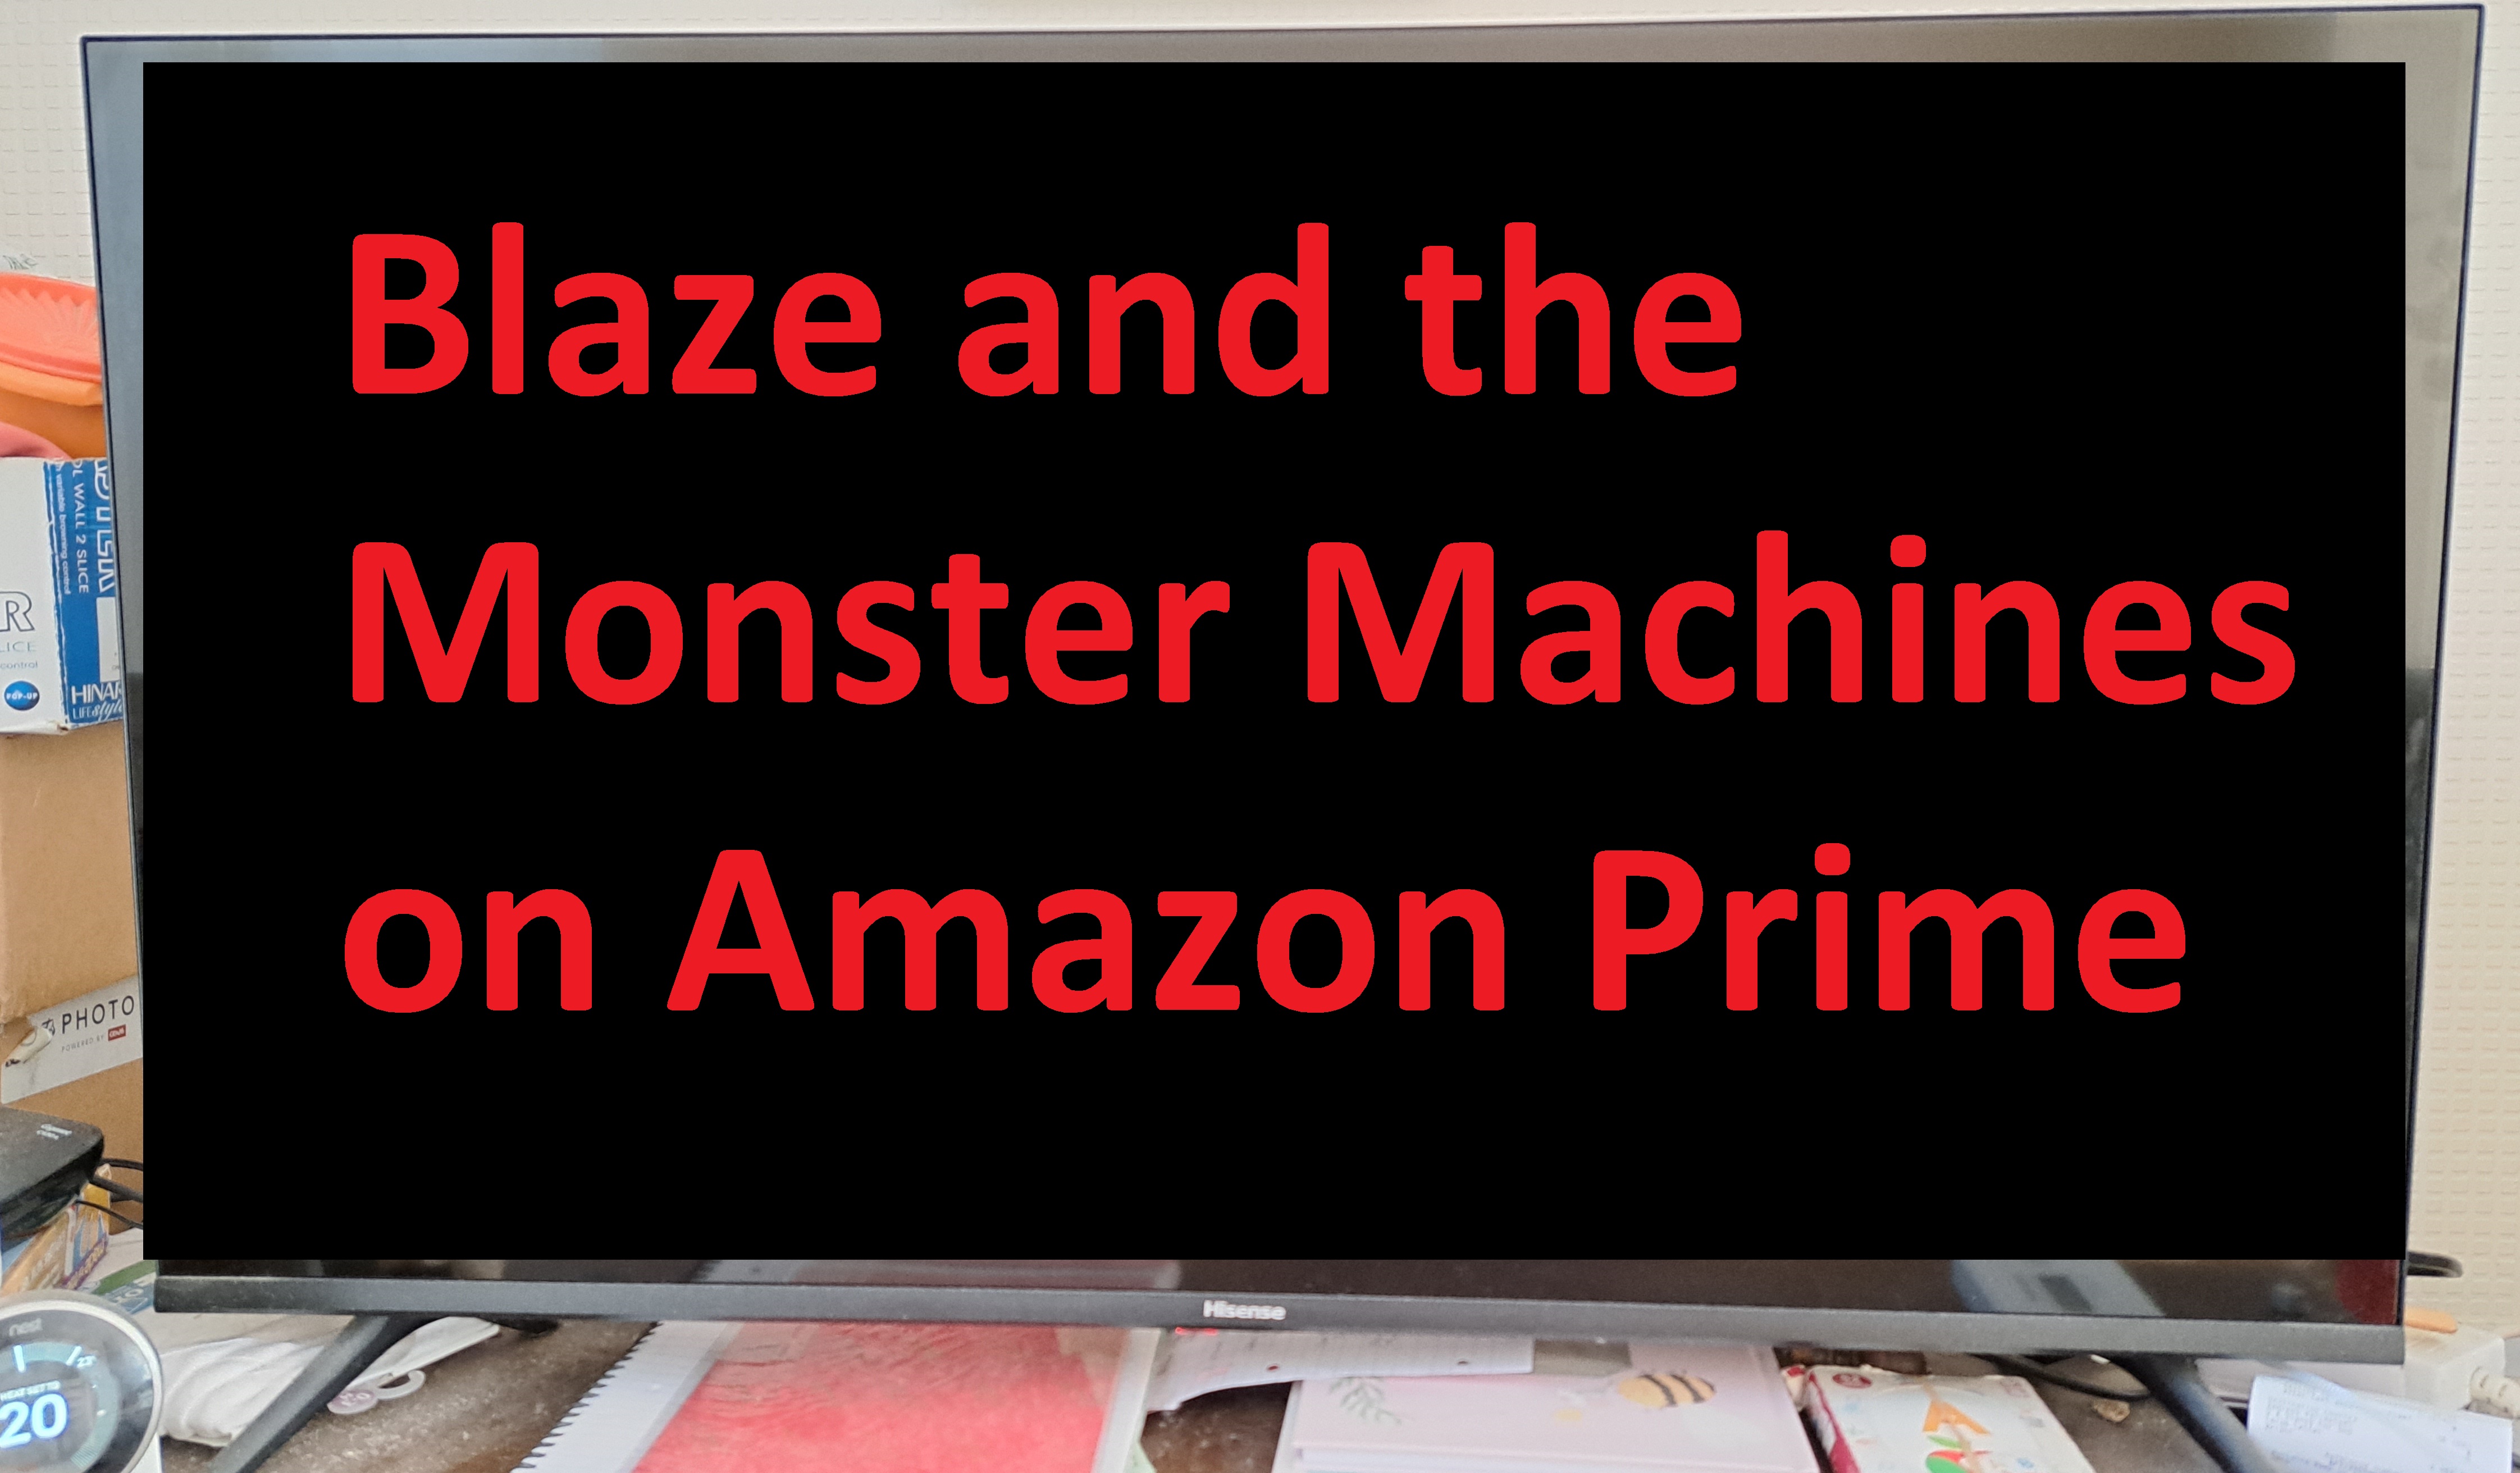 Blaze and the Monster Machines on Amazon Prime